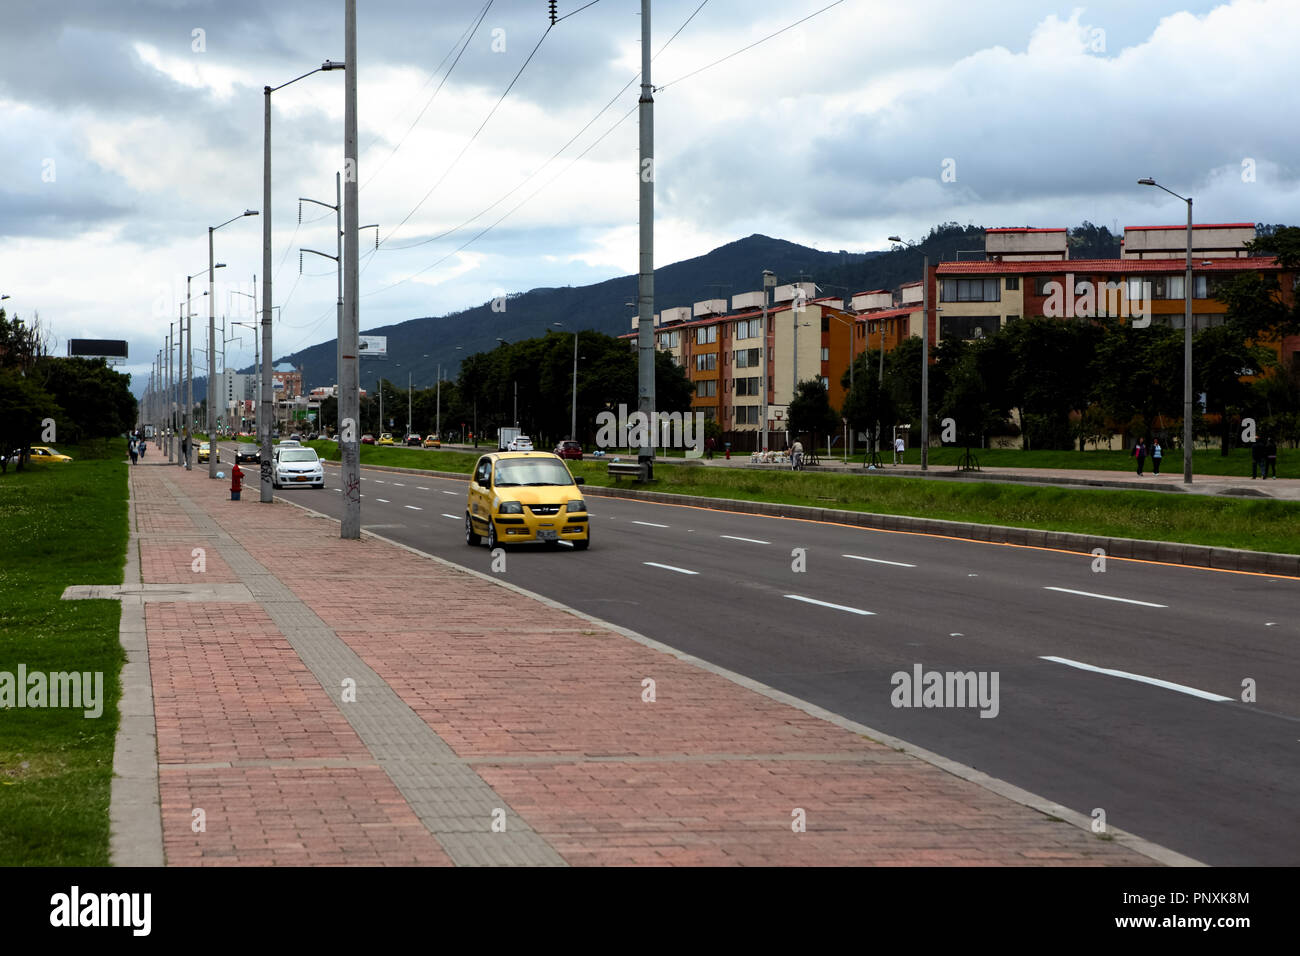 Bogotá, Colombia - May 01, 2017: Looking northwards on Carrera Novena or Avenue 9 in the capital city. Stock Photo